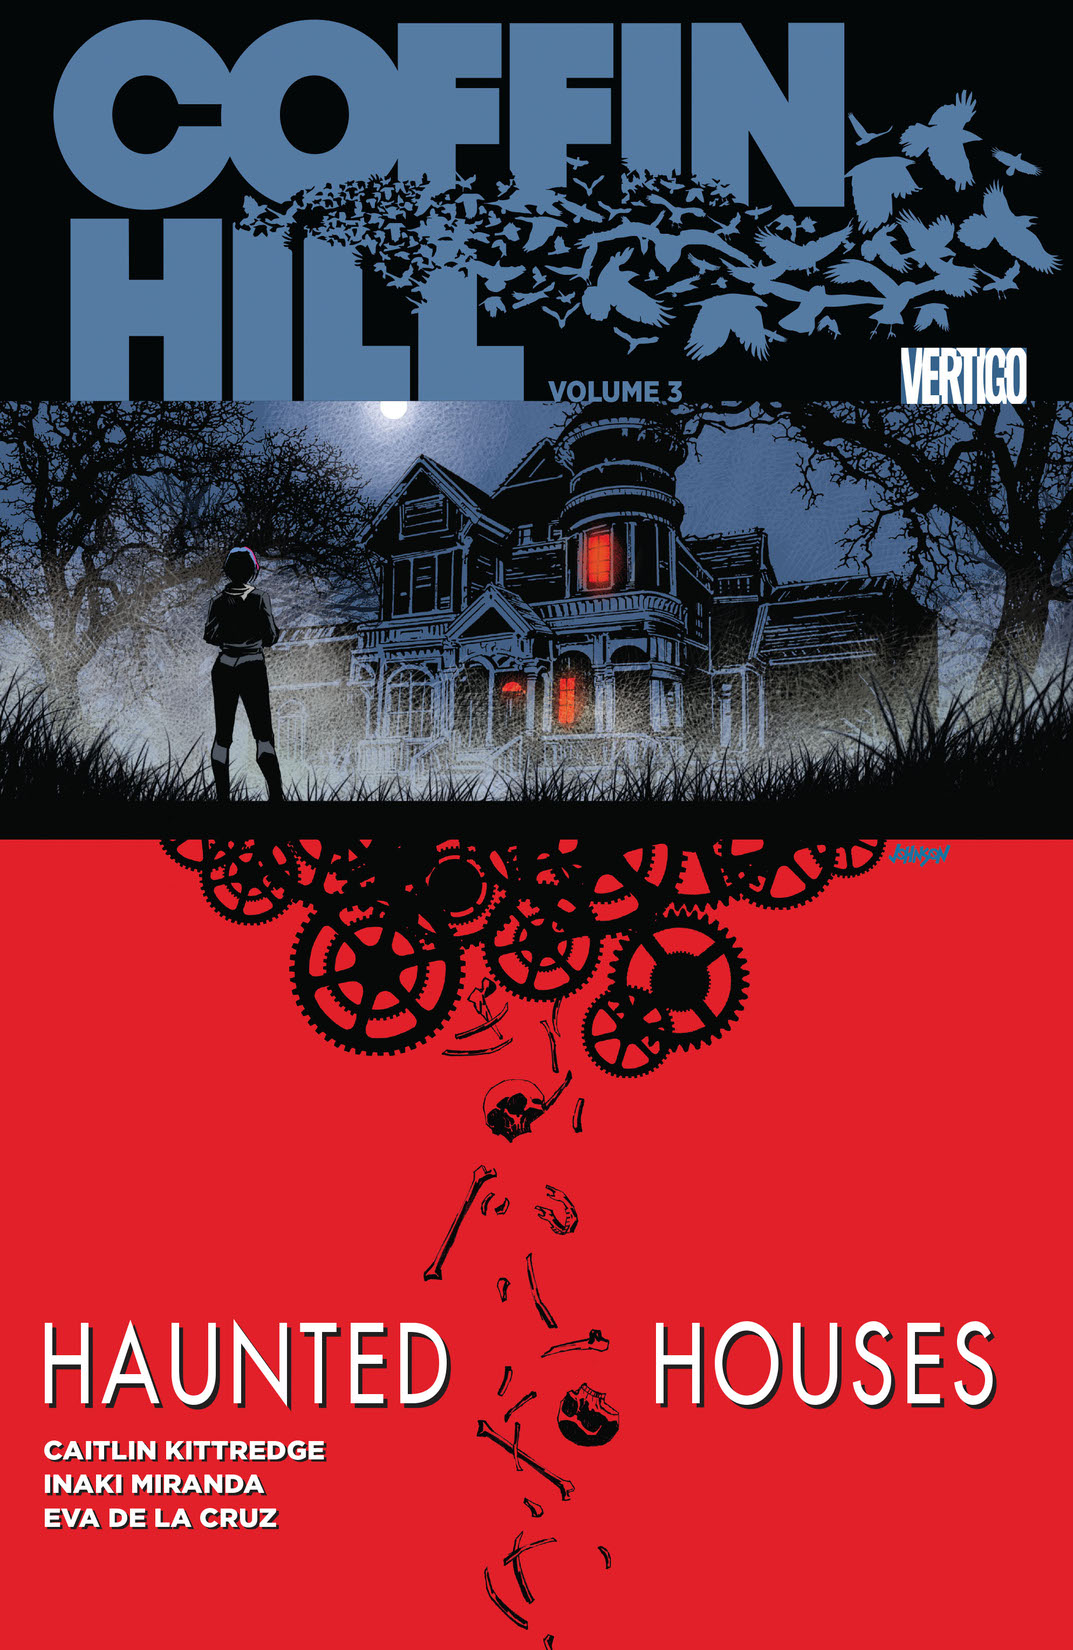 Coffin Hill Vol. 3: Haunted Houses preview images